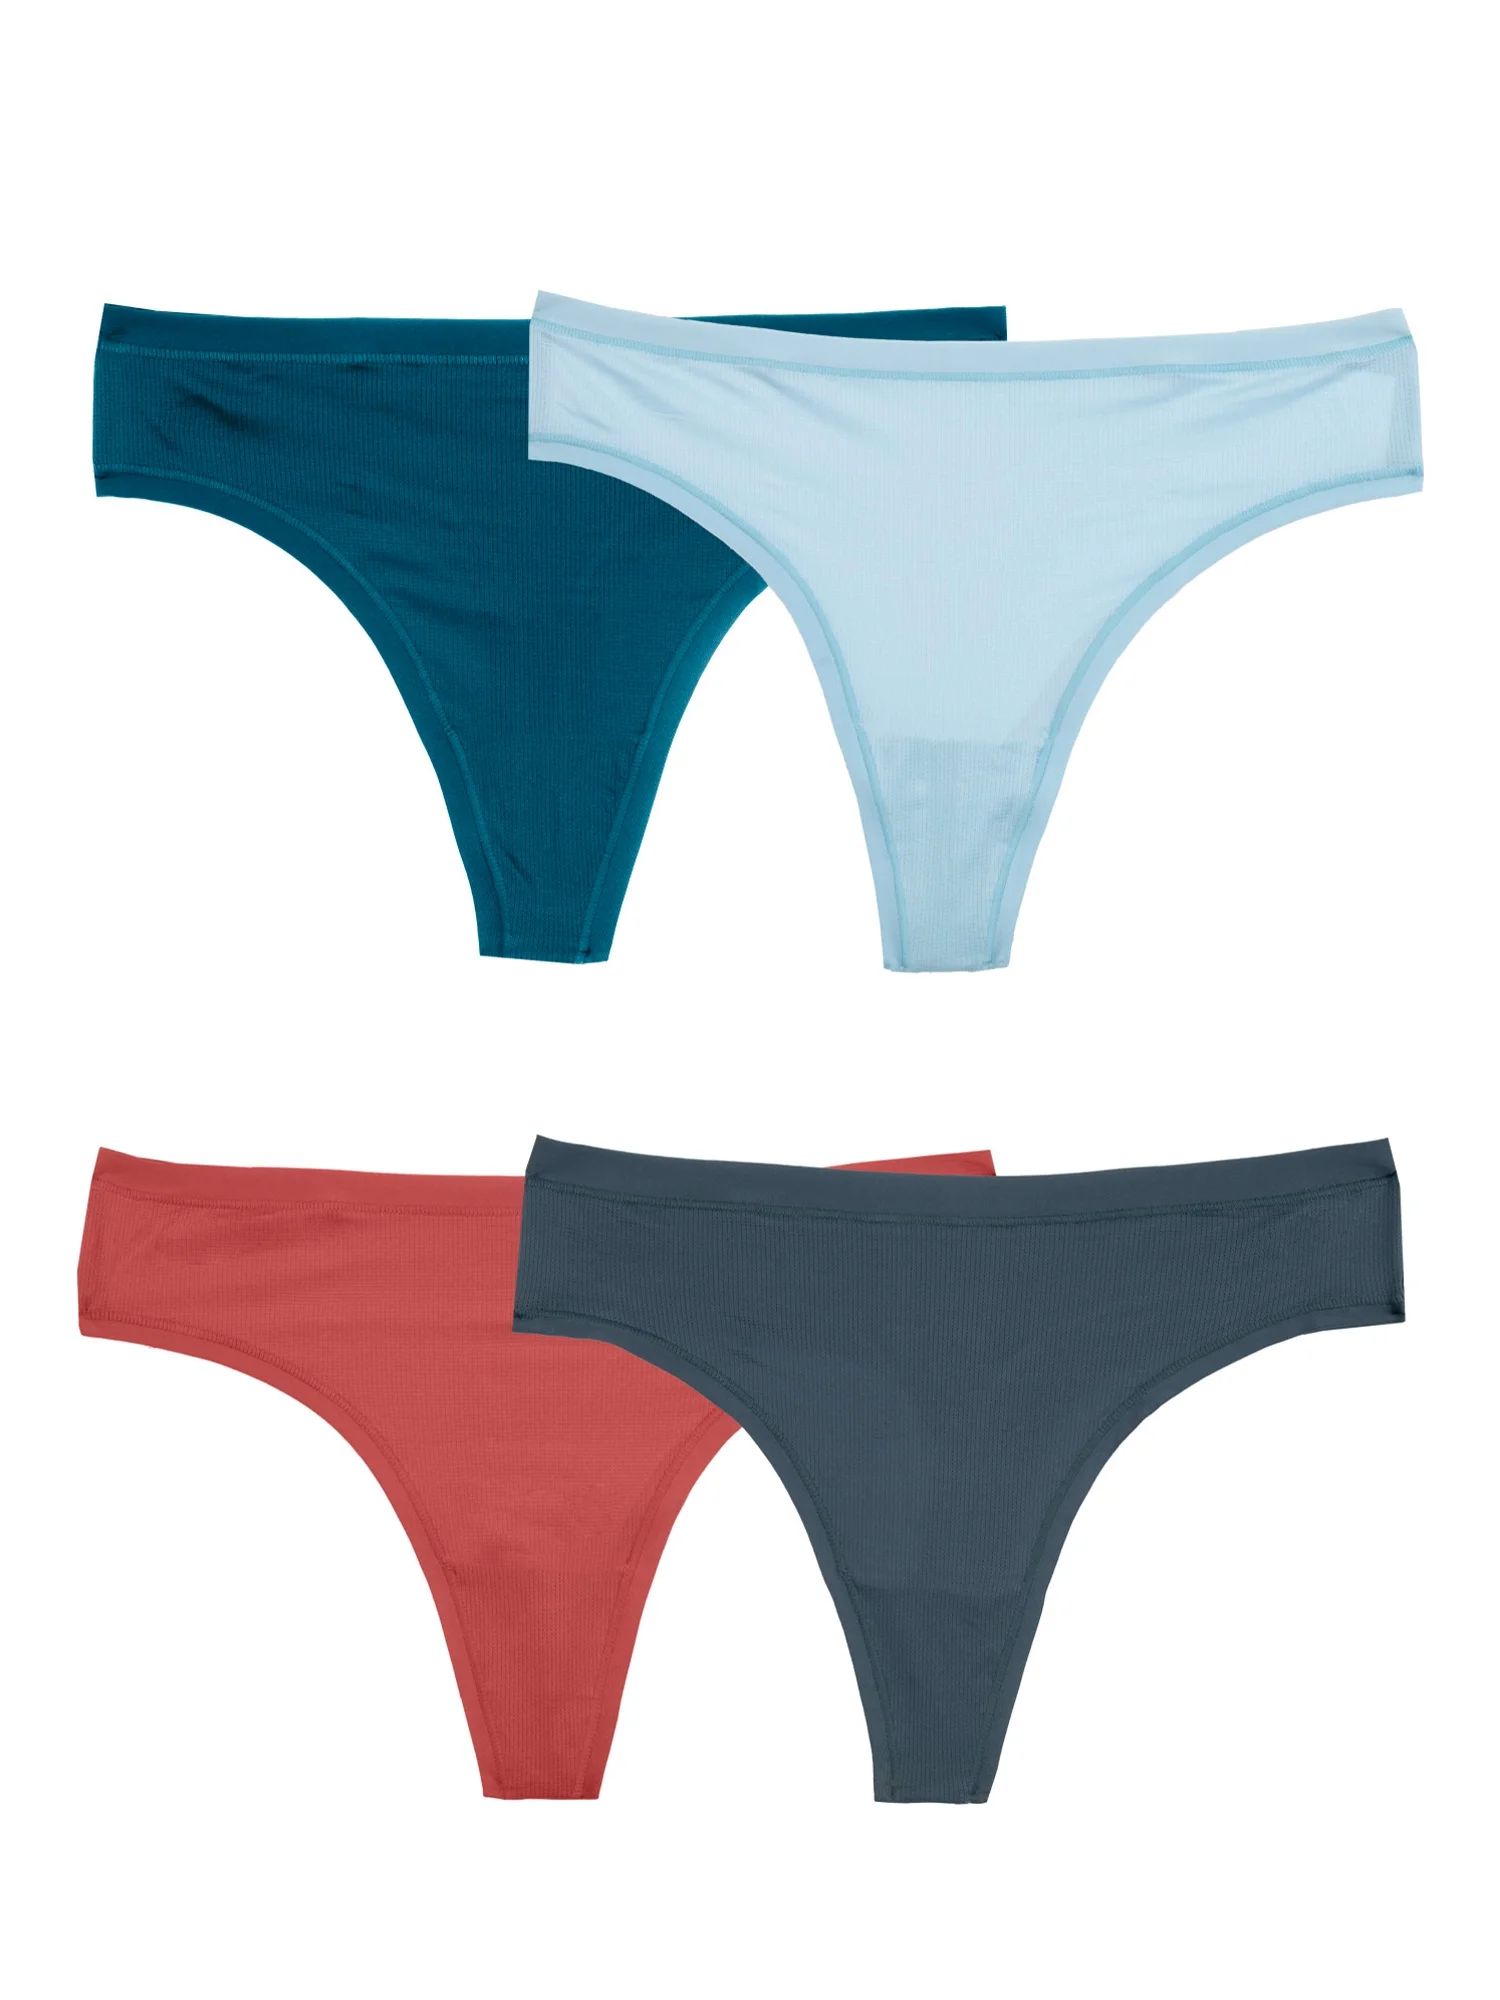 Fruit of the Loom Women's Getaway Collection, Cooling Mesh Thong Underwear, 4 Pack | Walmart (US)